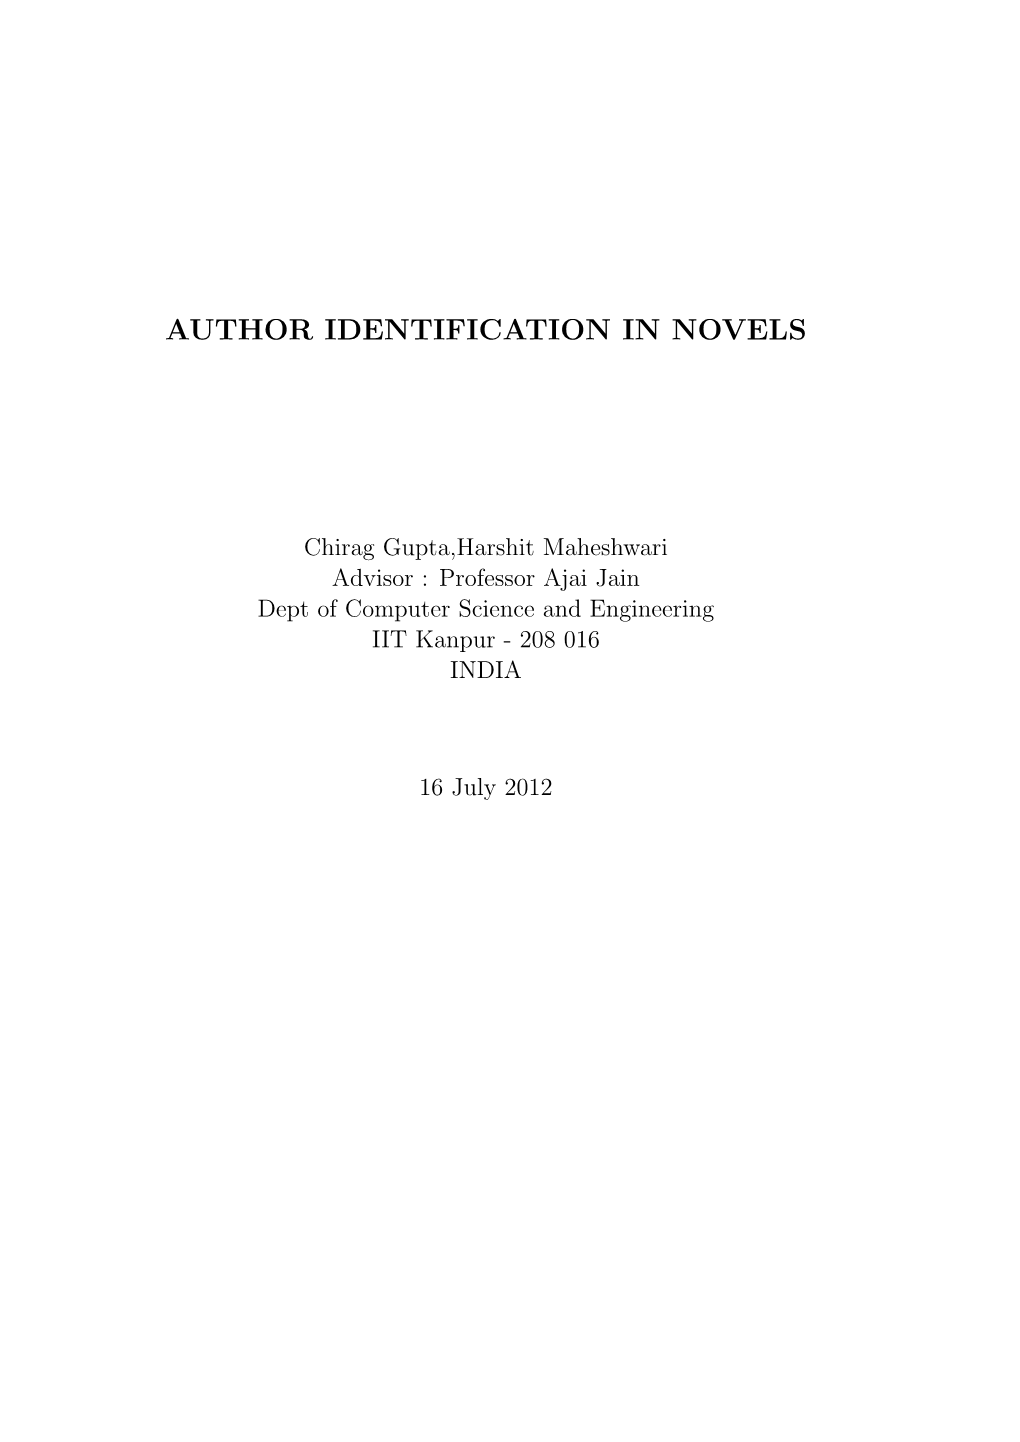 Author Identification in Novels